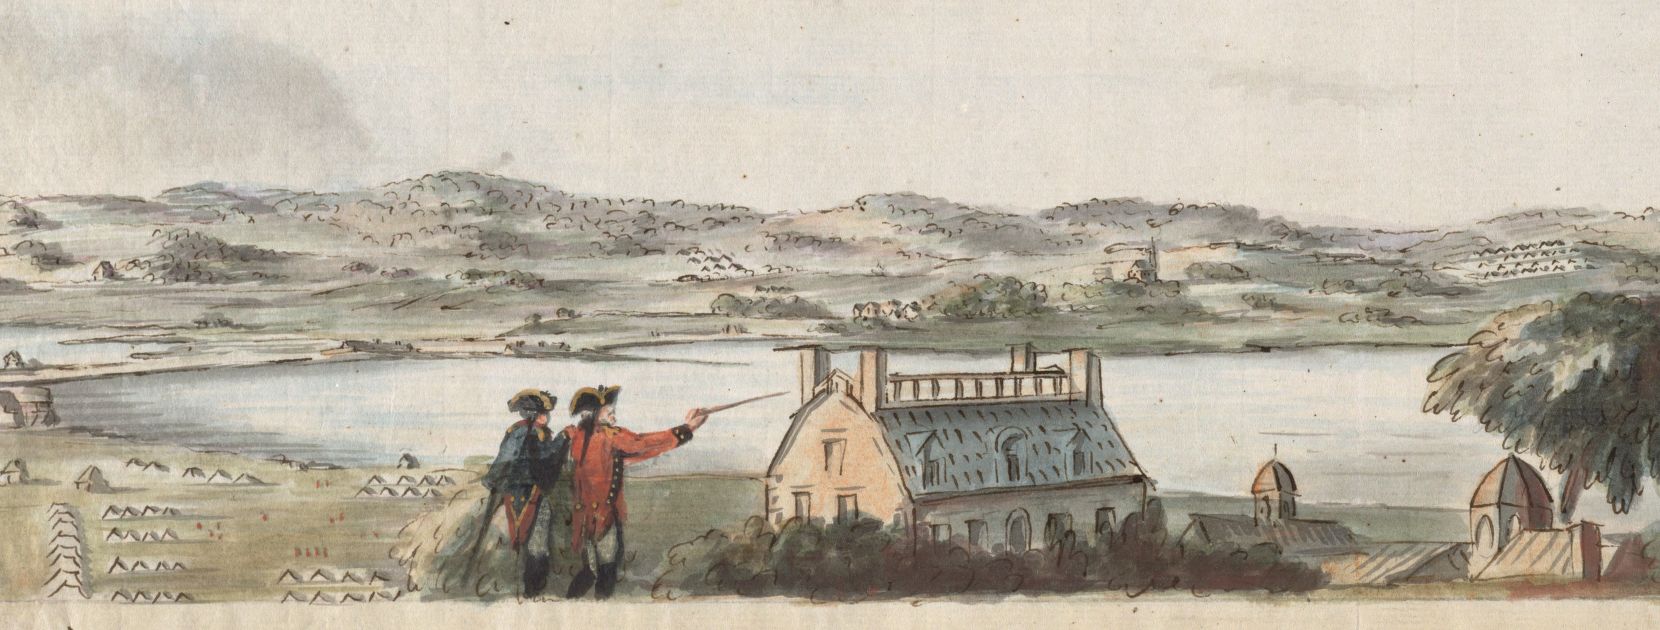 A color landscape view of the area around boston. Two figures are shown looking out over John Hancock's house and the river beyond, with troop encampments depicted to their left.